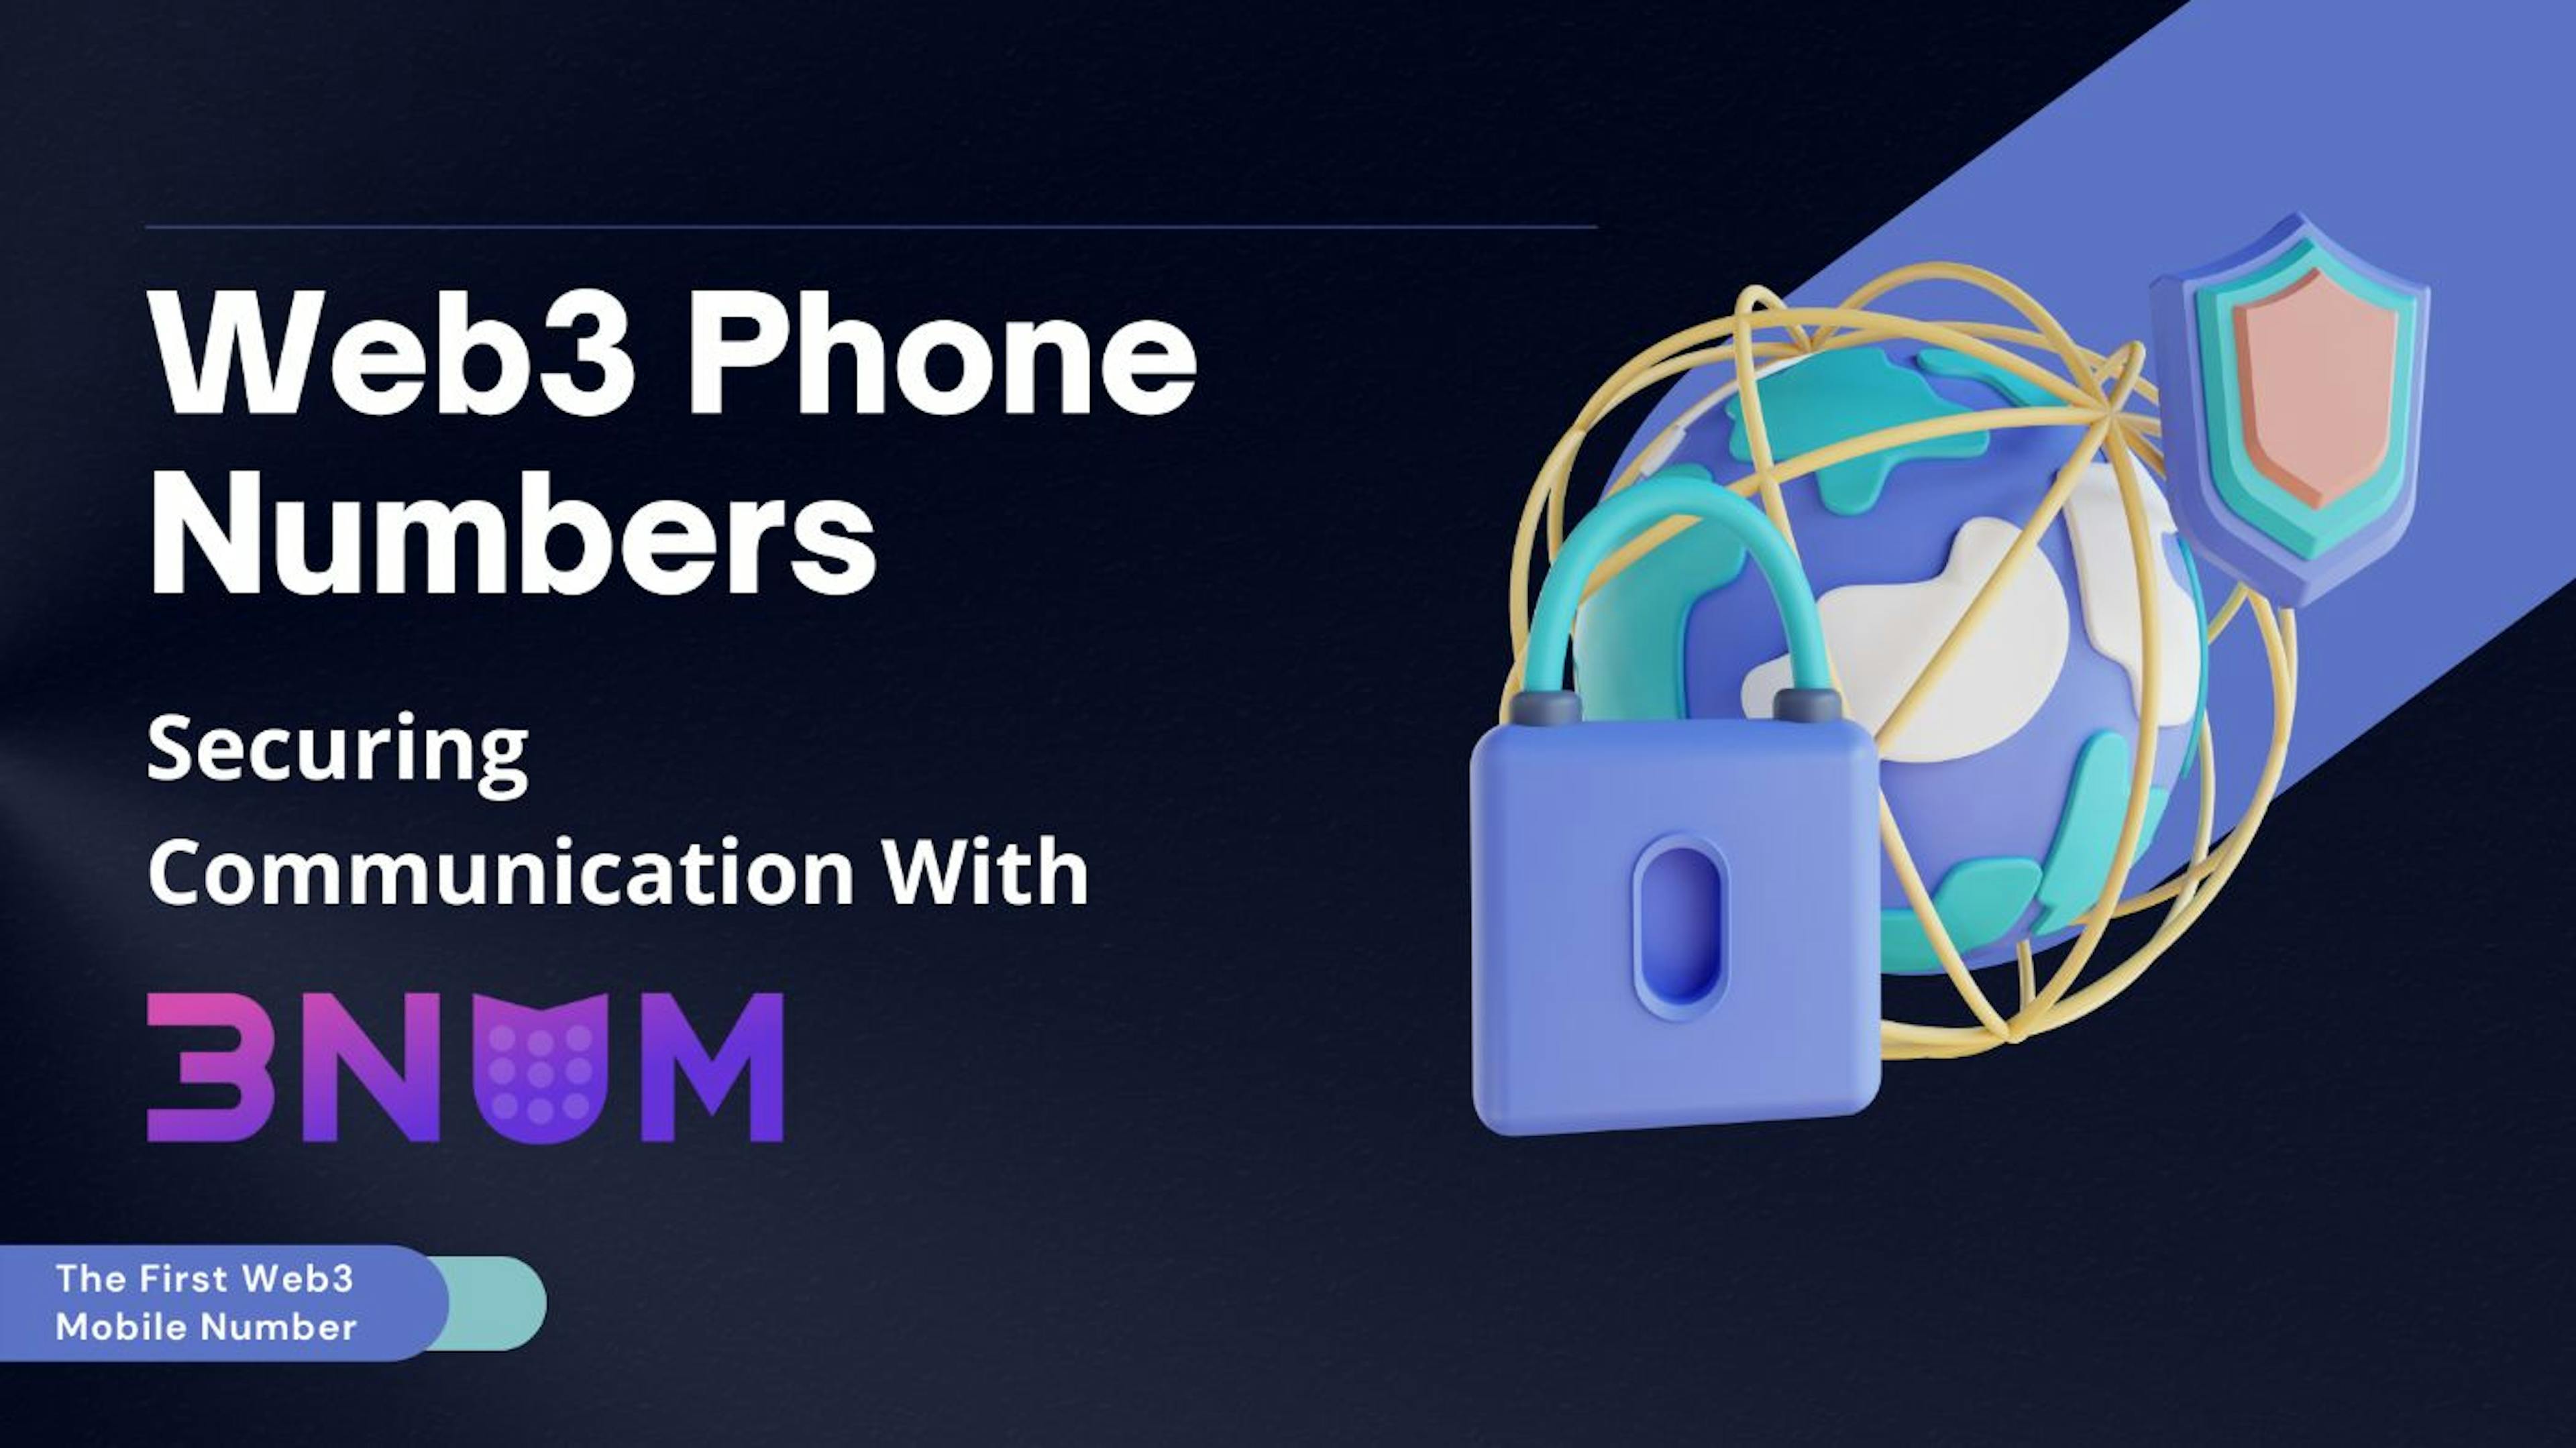 featured image - Web3 Phone Numbers: How 3NUM is Securing Communication